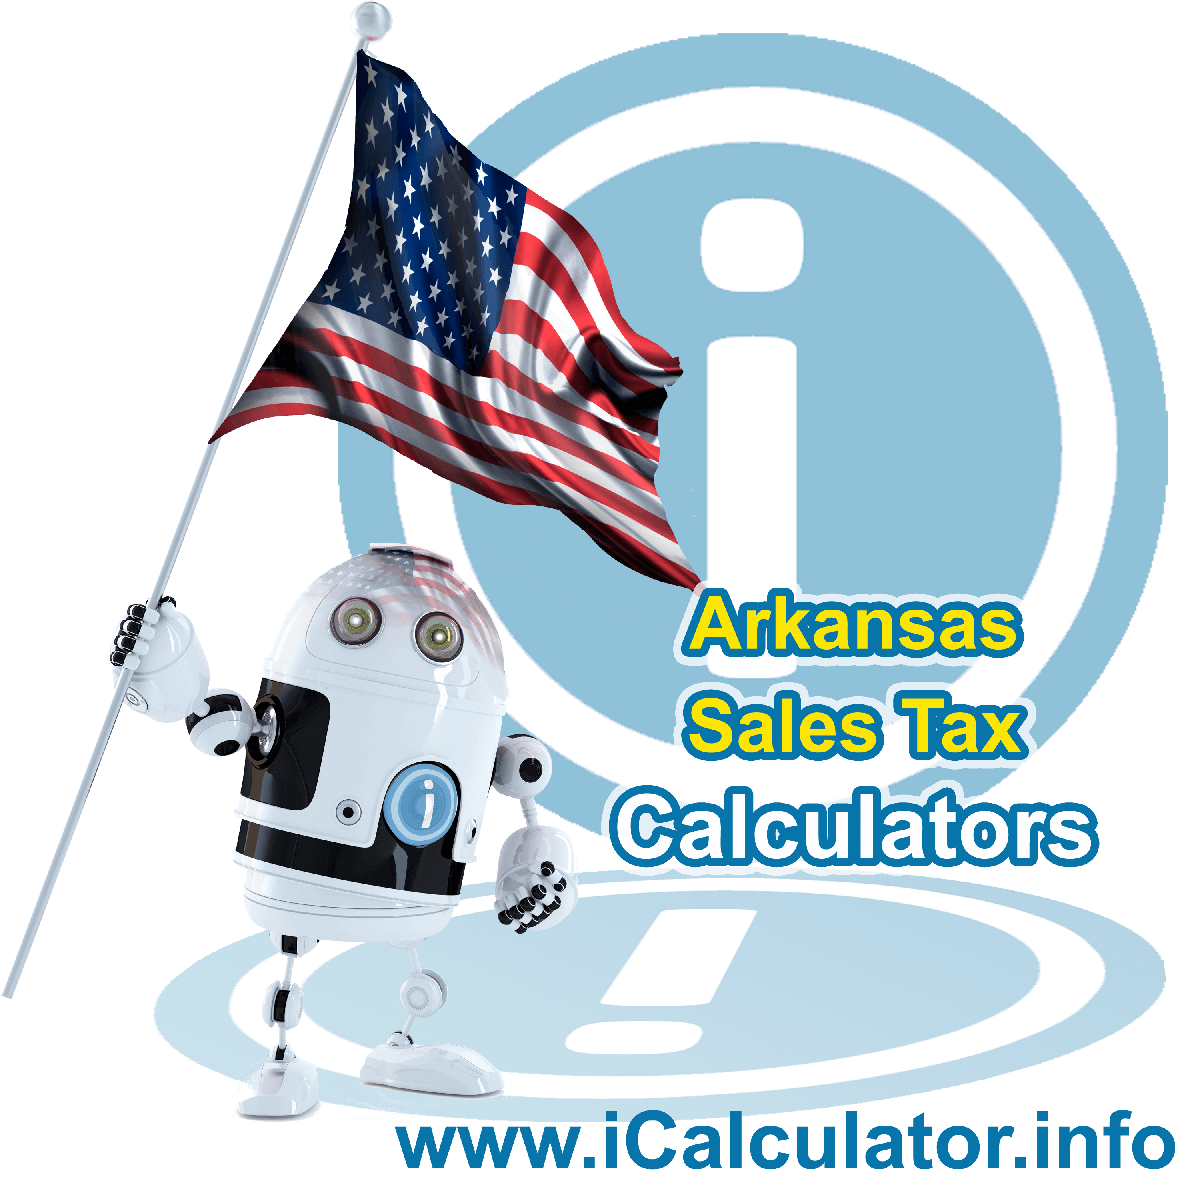 Mcgehee Sales Rates: This image illustrates a calculator robot calculating Mcgehee sales tax manually using the Mcgehee Sales Tax Formula. You can use this information to calculate Mcgehee Sales Tax manually or use the Mcgehee Sales Tax Calculator to calculate sales tax online.